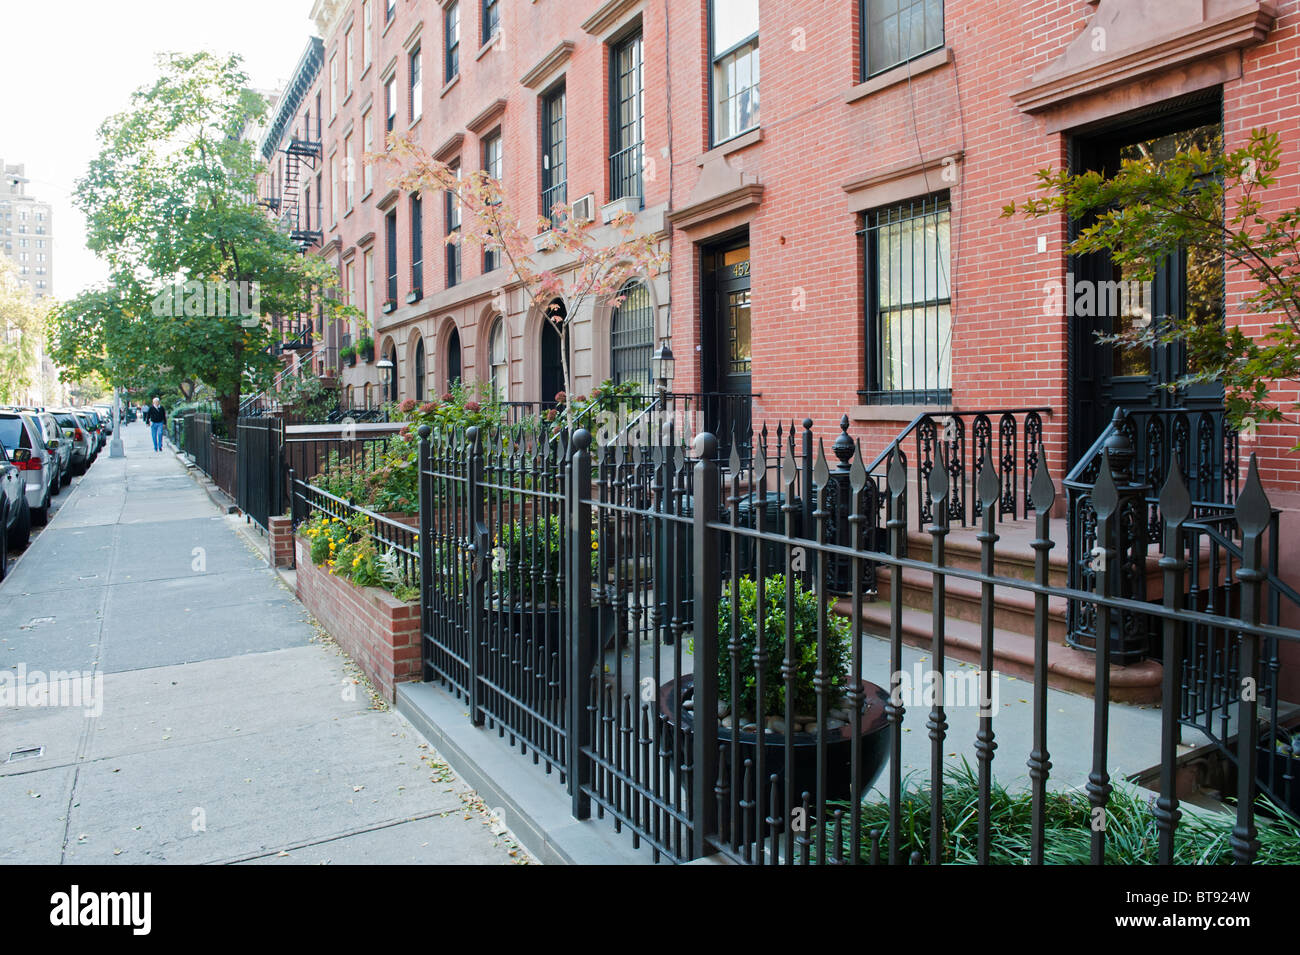 Typical residential street in Chelsea district of Manhattan New York City Stock Photo